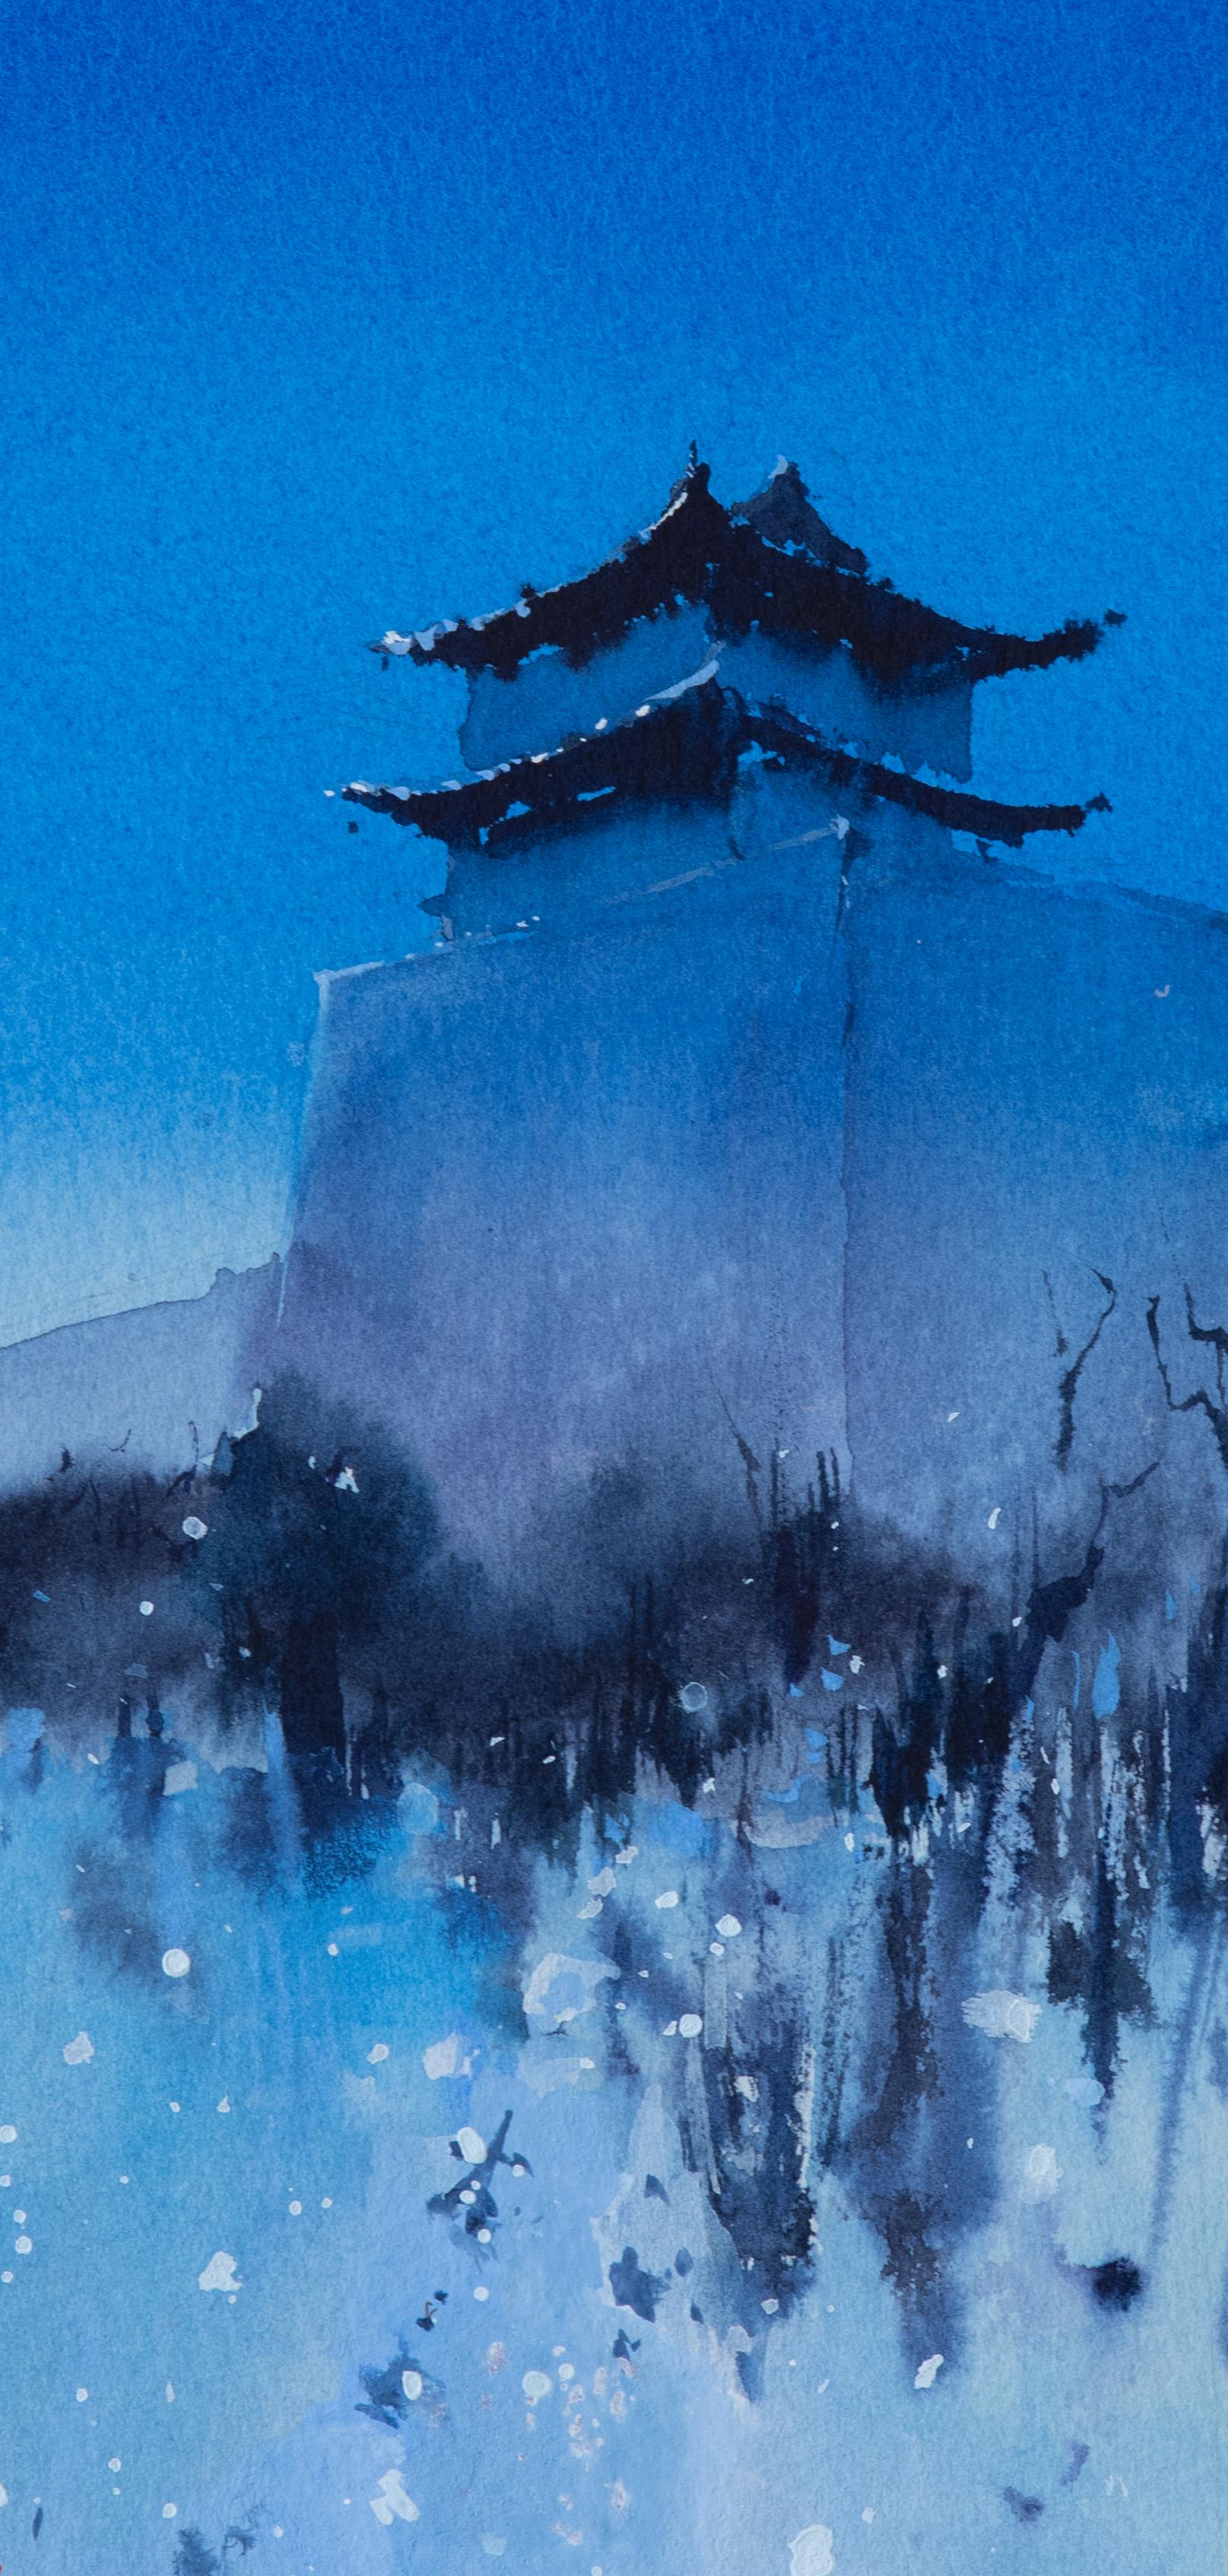 <p>Artist Comments<br>Artist Siyuan Ma depicts an impression of one of the ancient city walls in China. These walls serve as important defensive structures - products of Chinese architectural history. 